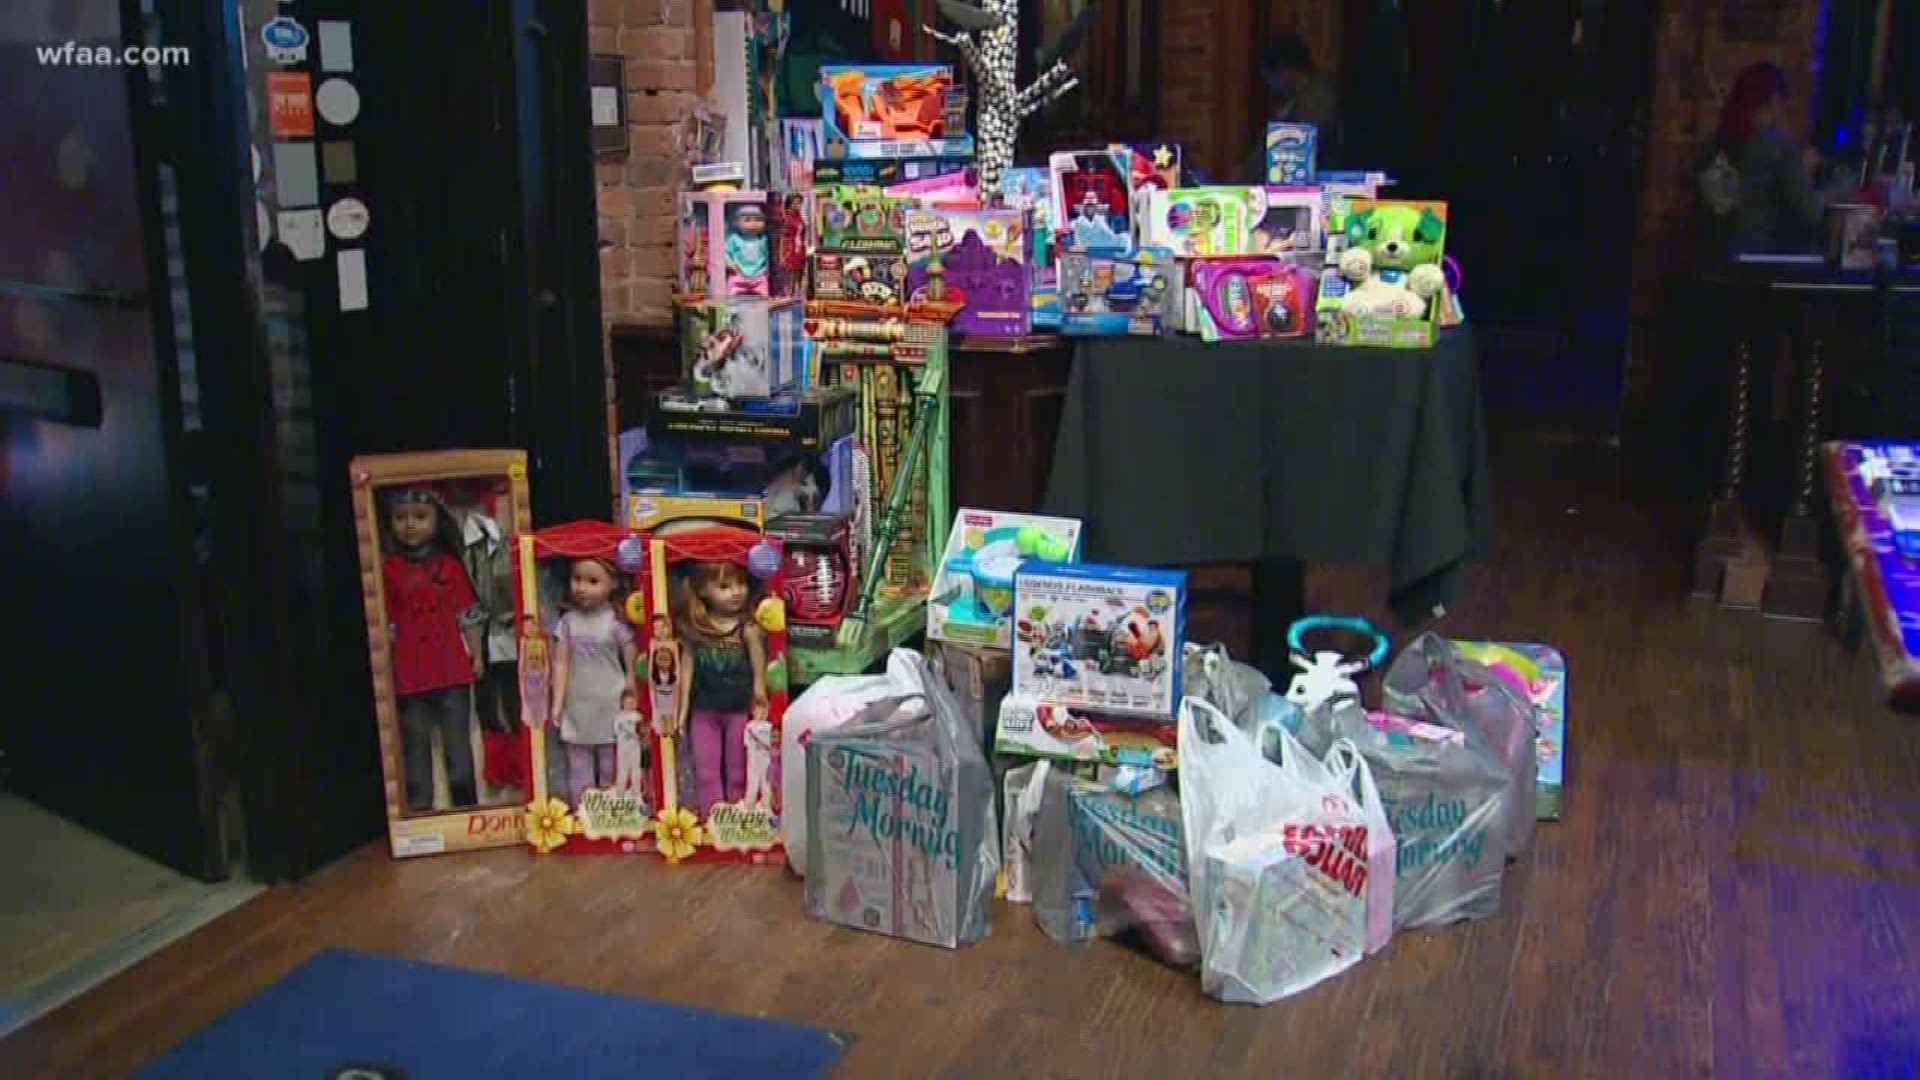 Once recipients, family now donates to Santa's Helpers